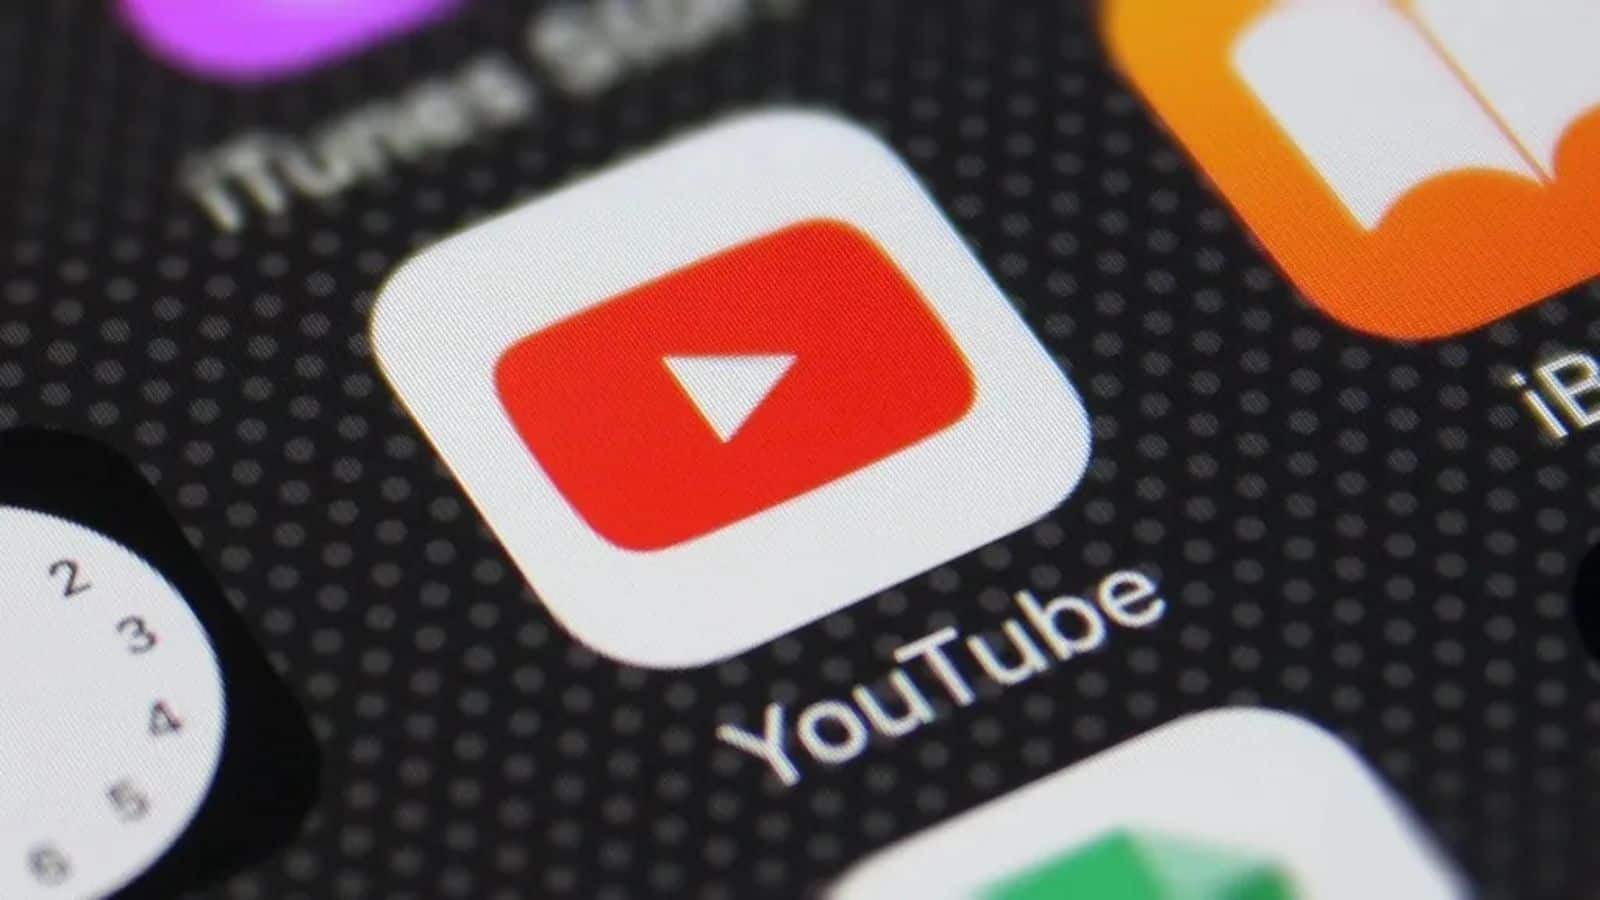 YouTube's new features make videos more shoppable